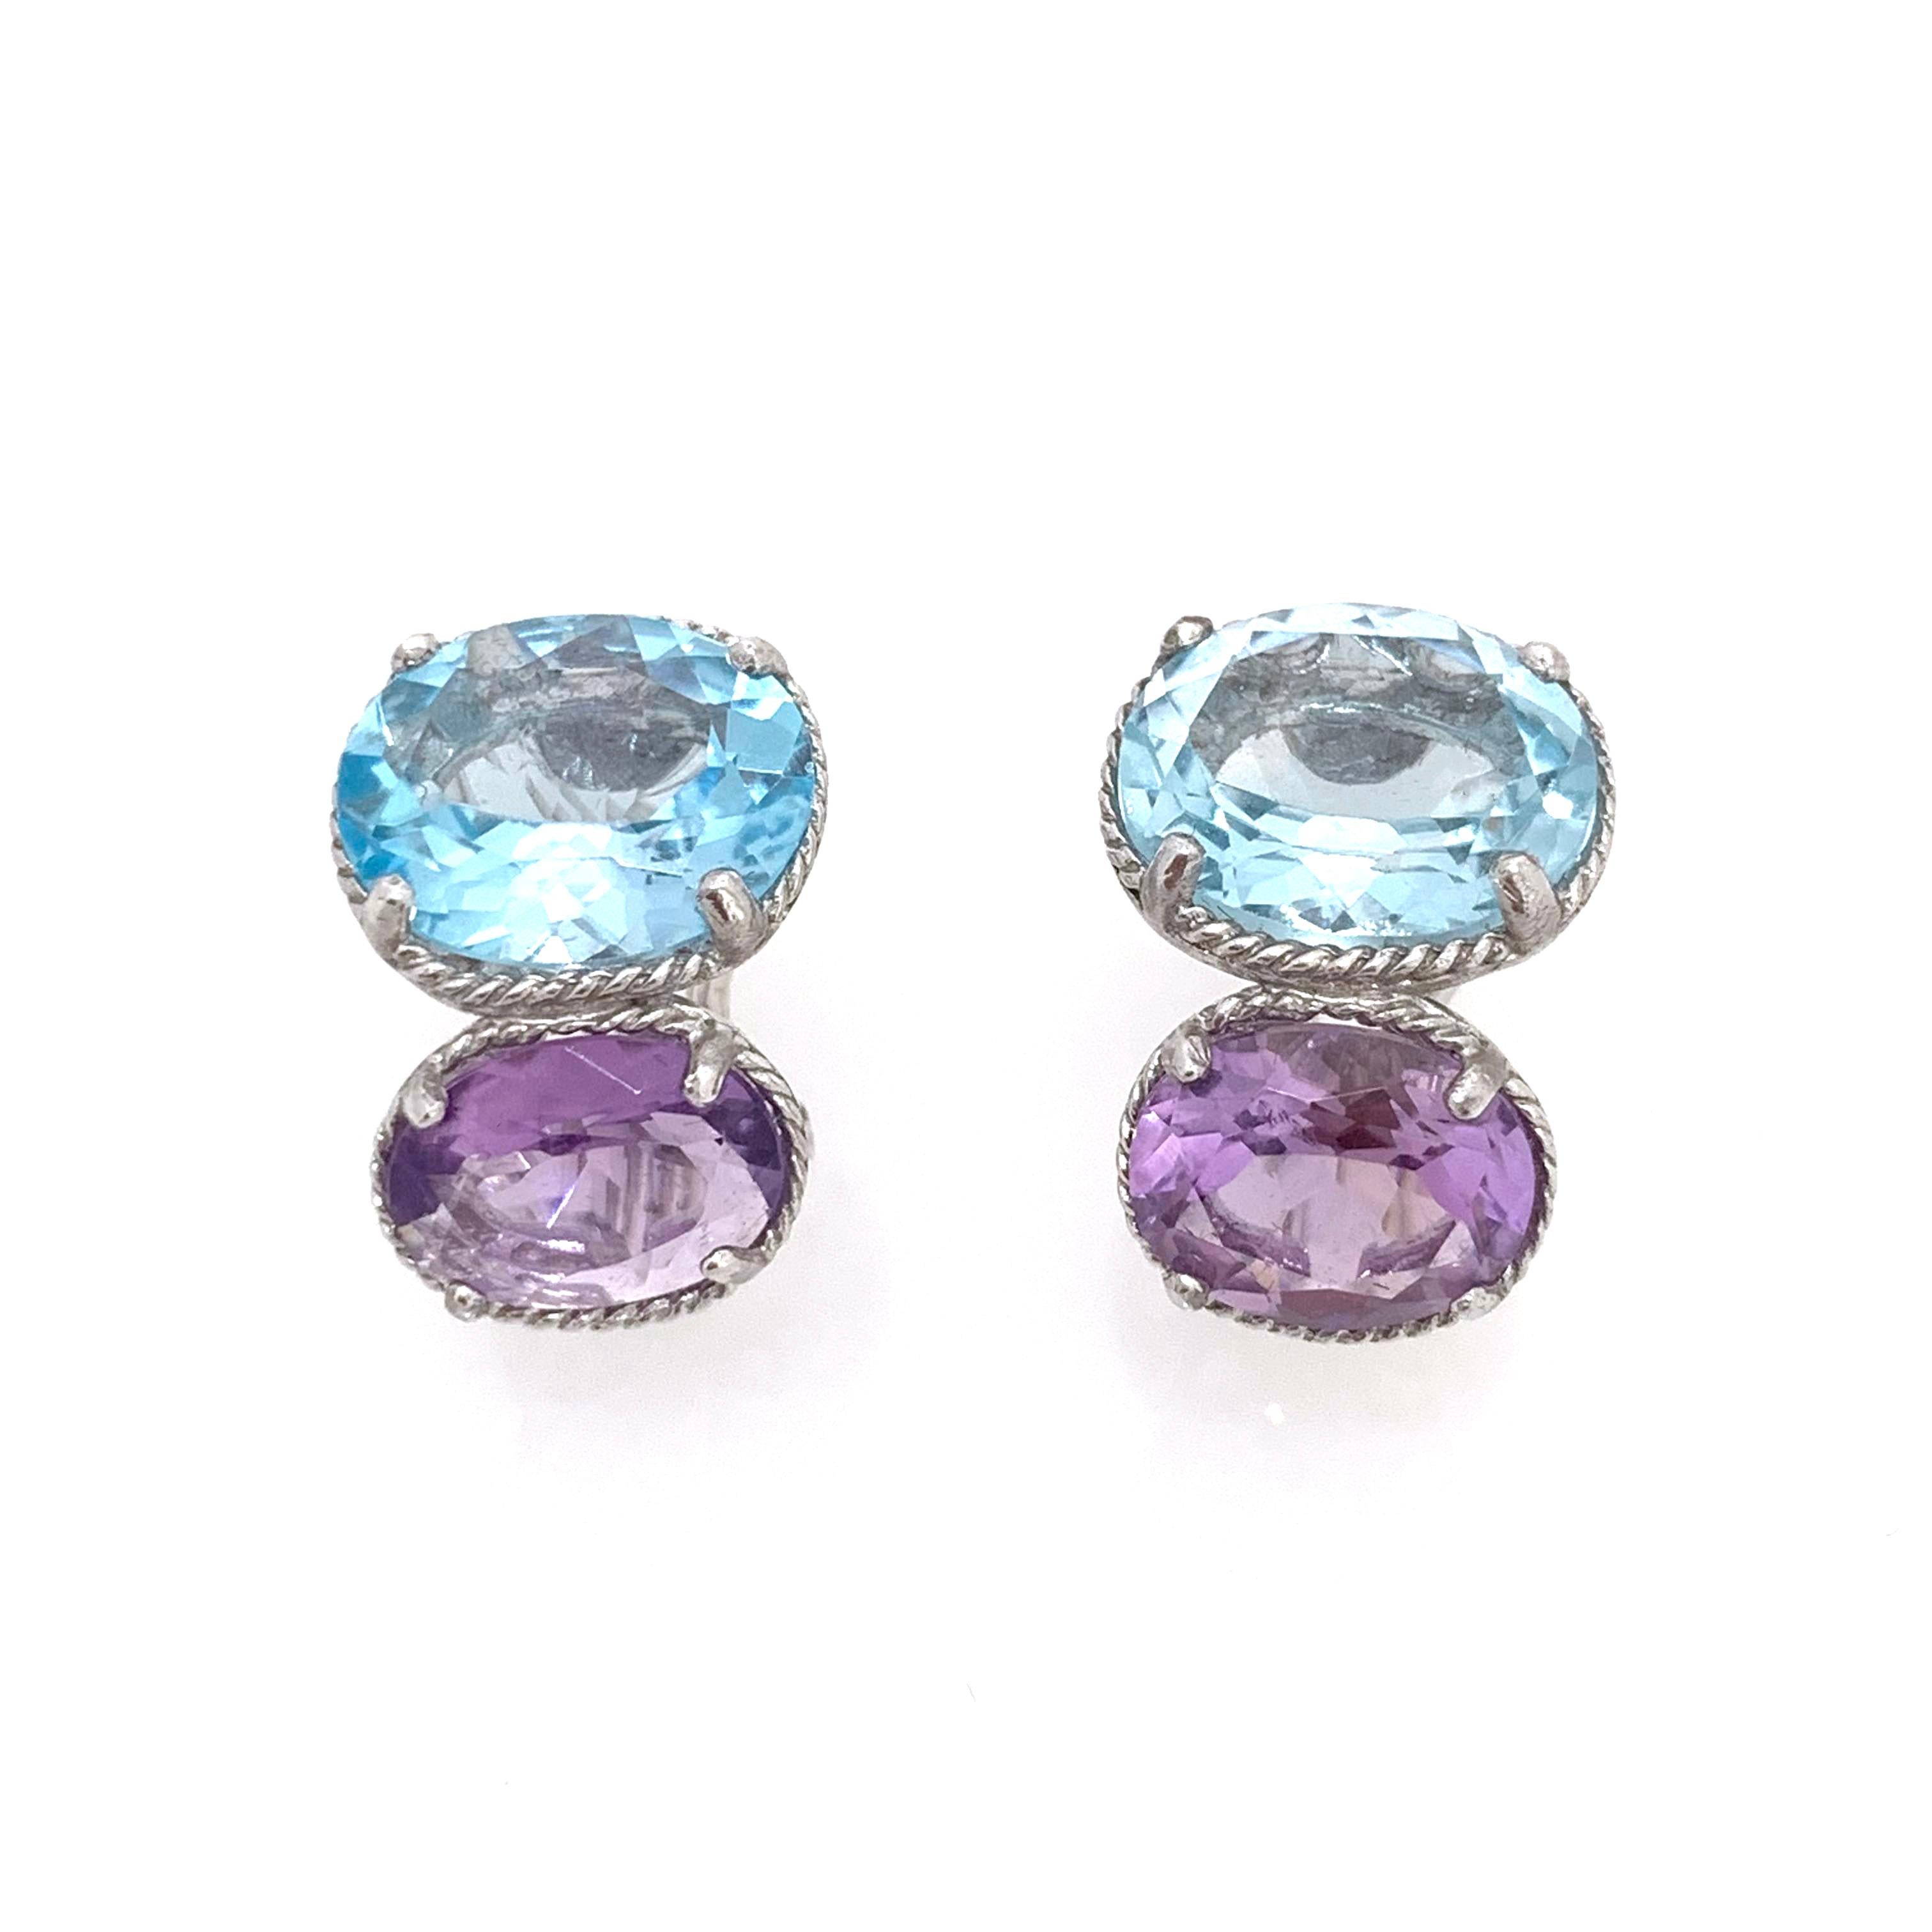 Stunning All-time Classic Bijoux Num Double Oval Blue Topaz and Amethyst Earrings. 

The earrings feature 4 beautiful AAA quality oval blue topaz and amethyst, handset in platinum plated sterling silver.  Straight post back with omega clip backing.